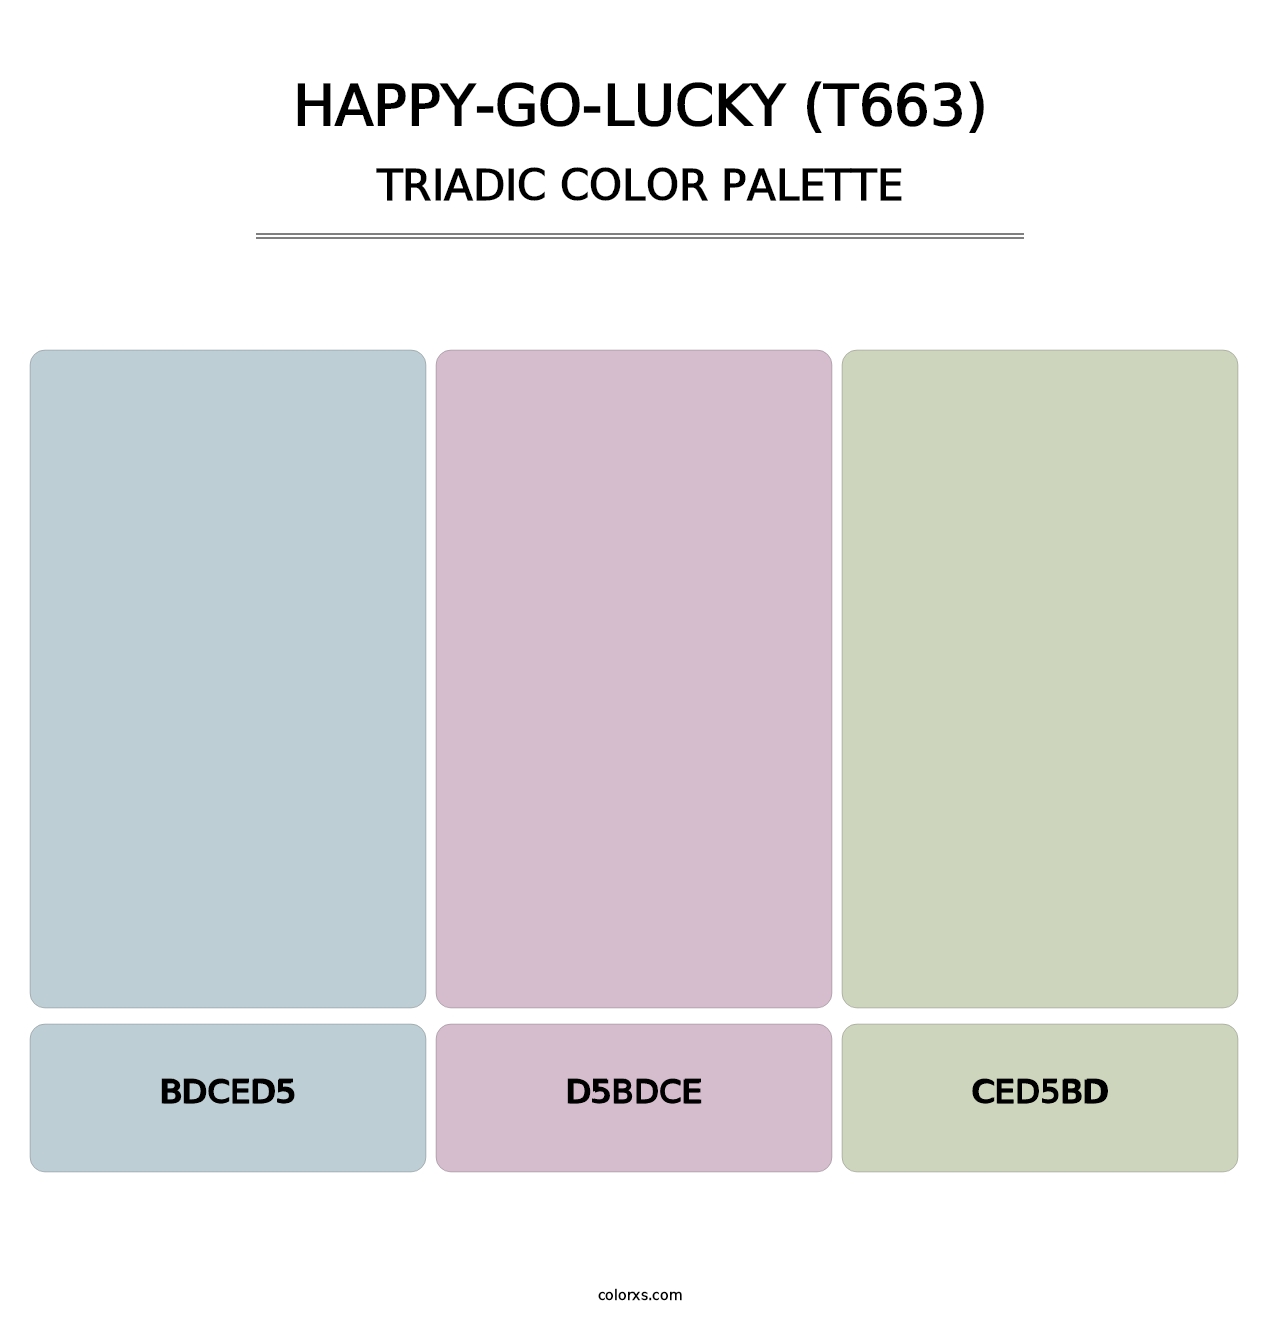 Happy-Go-Lucky (T663) - Triadic Color Palette